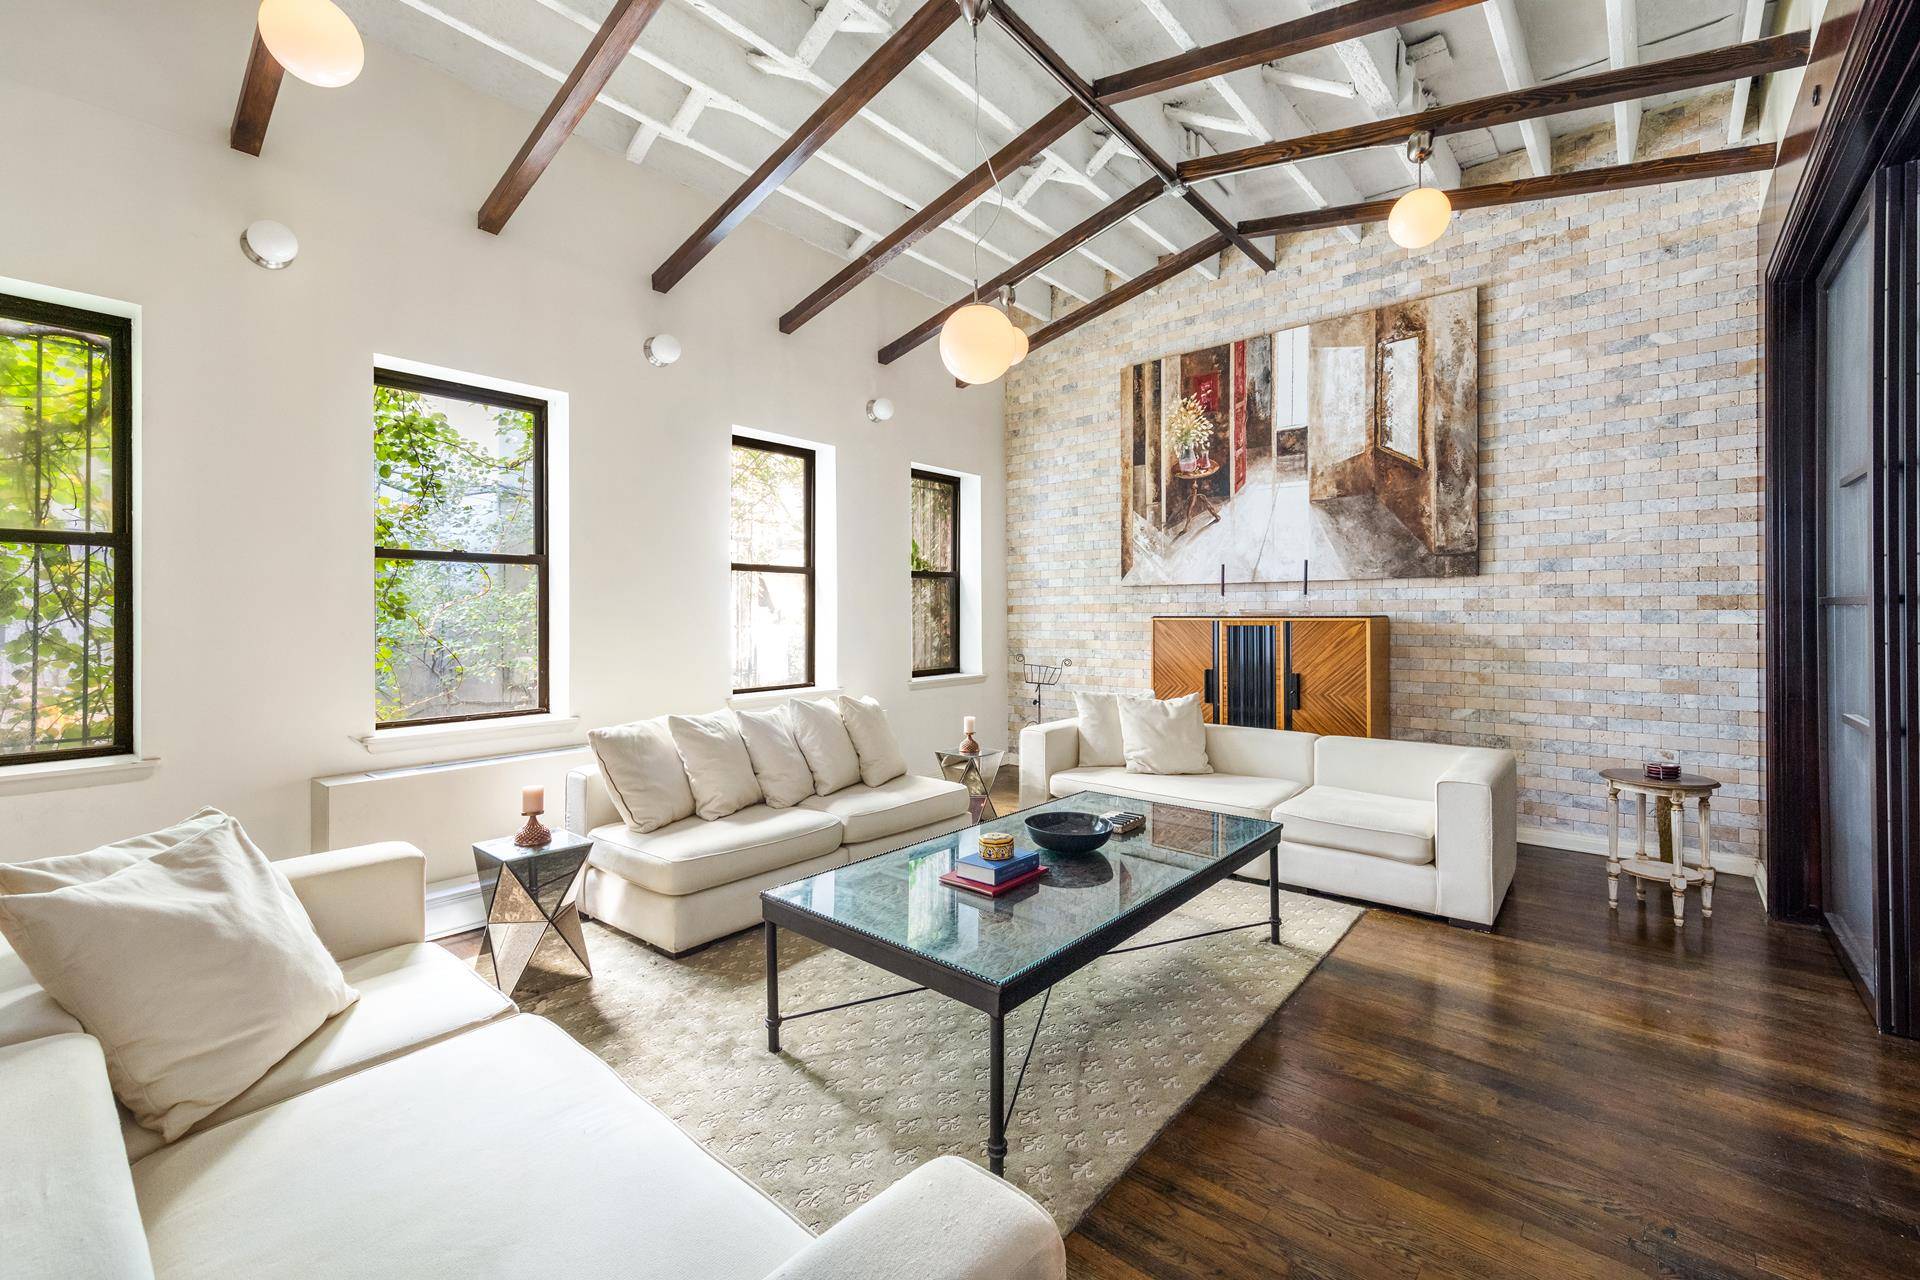 Located on a historic block in the West Village at the crossroads of SoHo, this classic, Prewar duplex offers dramatic scale through its height, width, and depth.